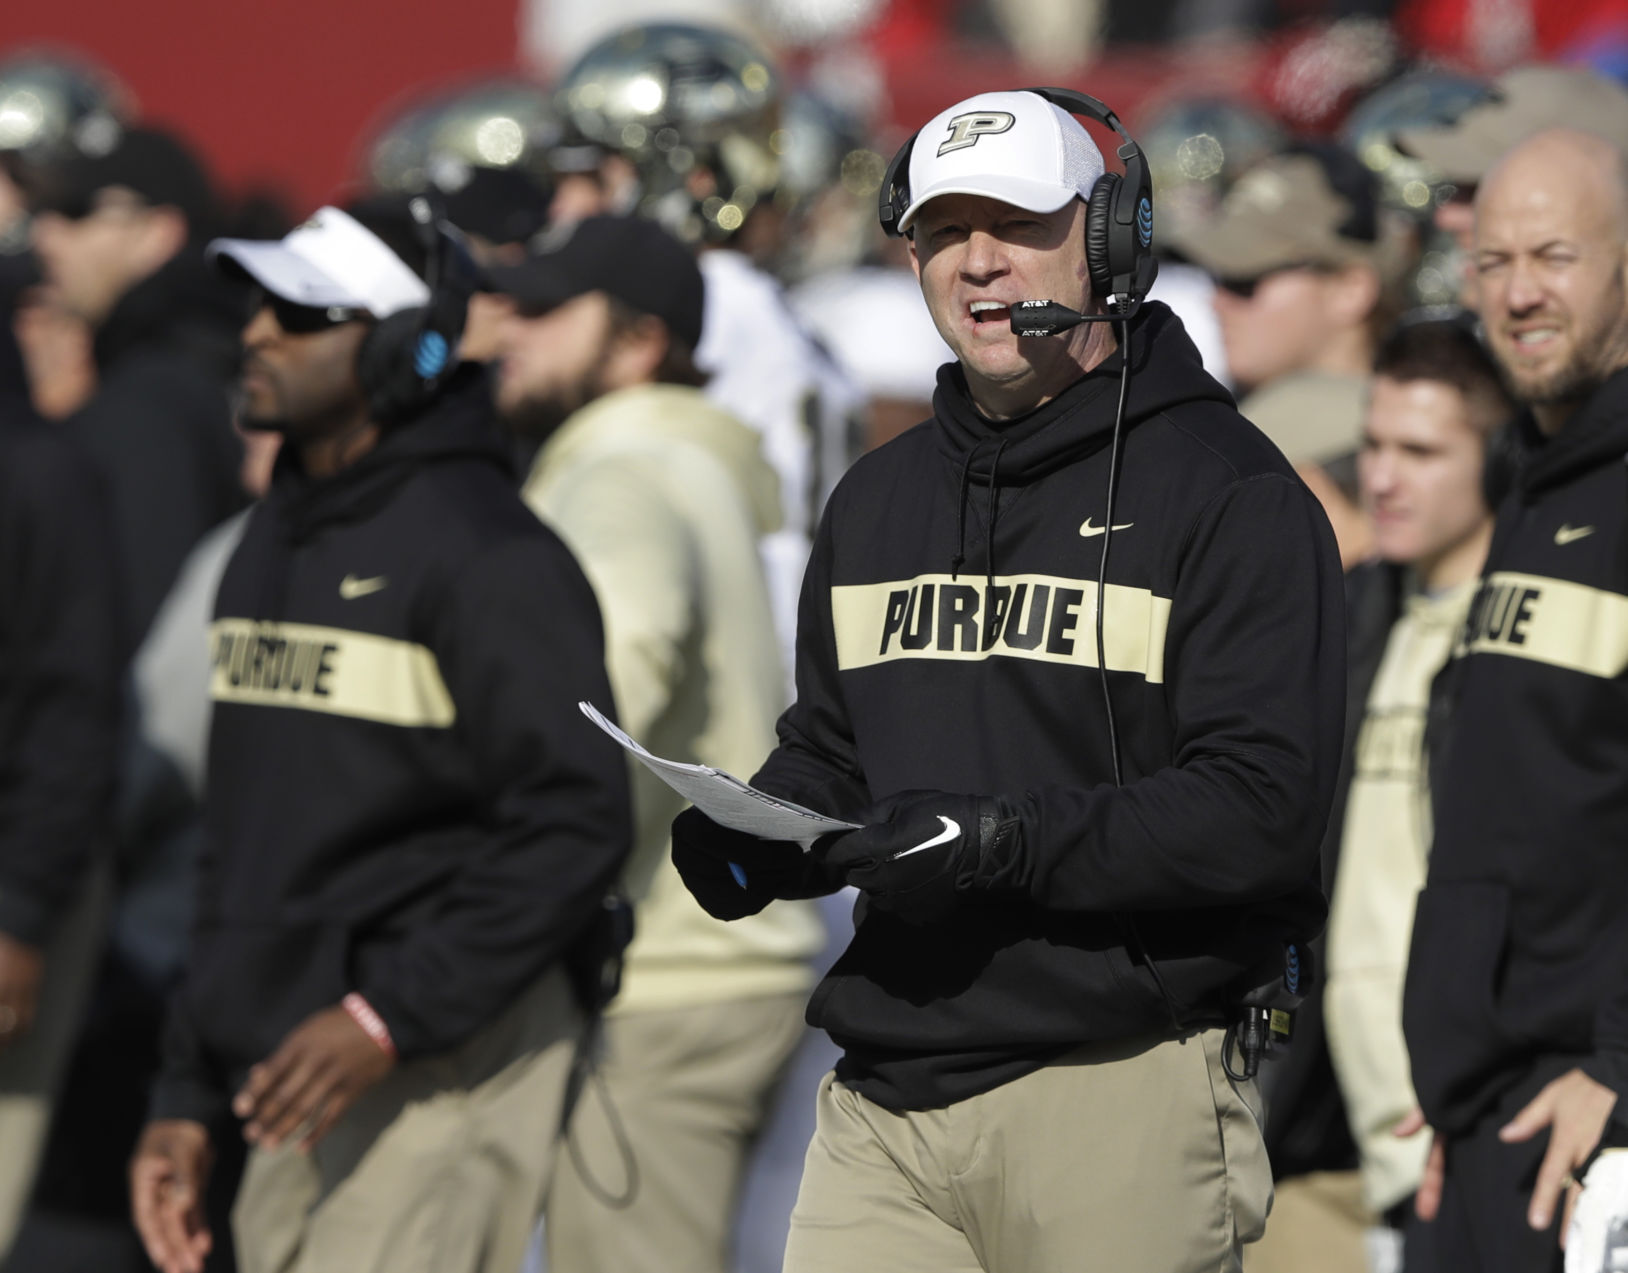 Purdue coach Jeff Brohm proposes running 2 football seasons in 2021